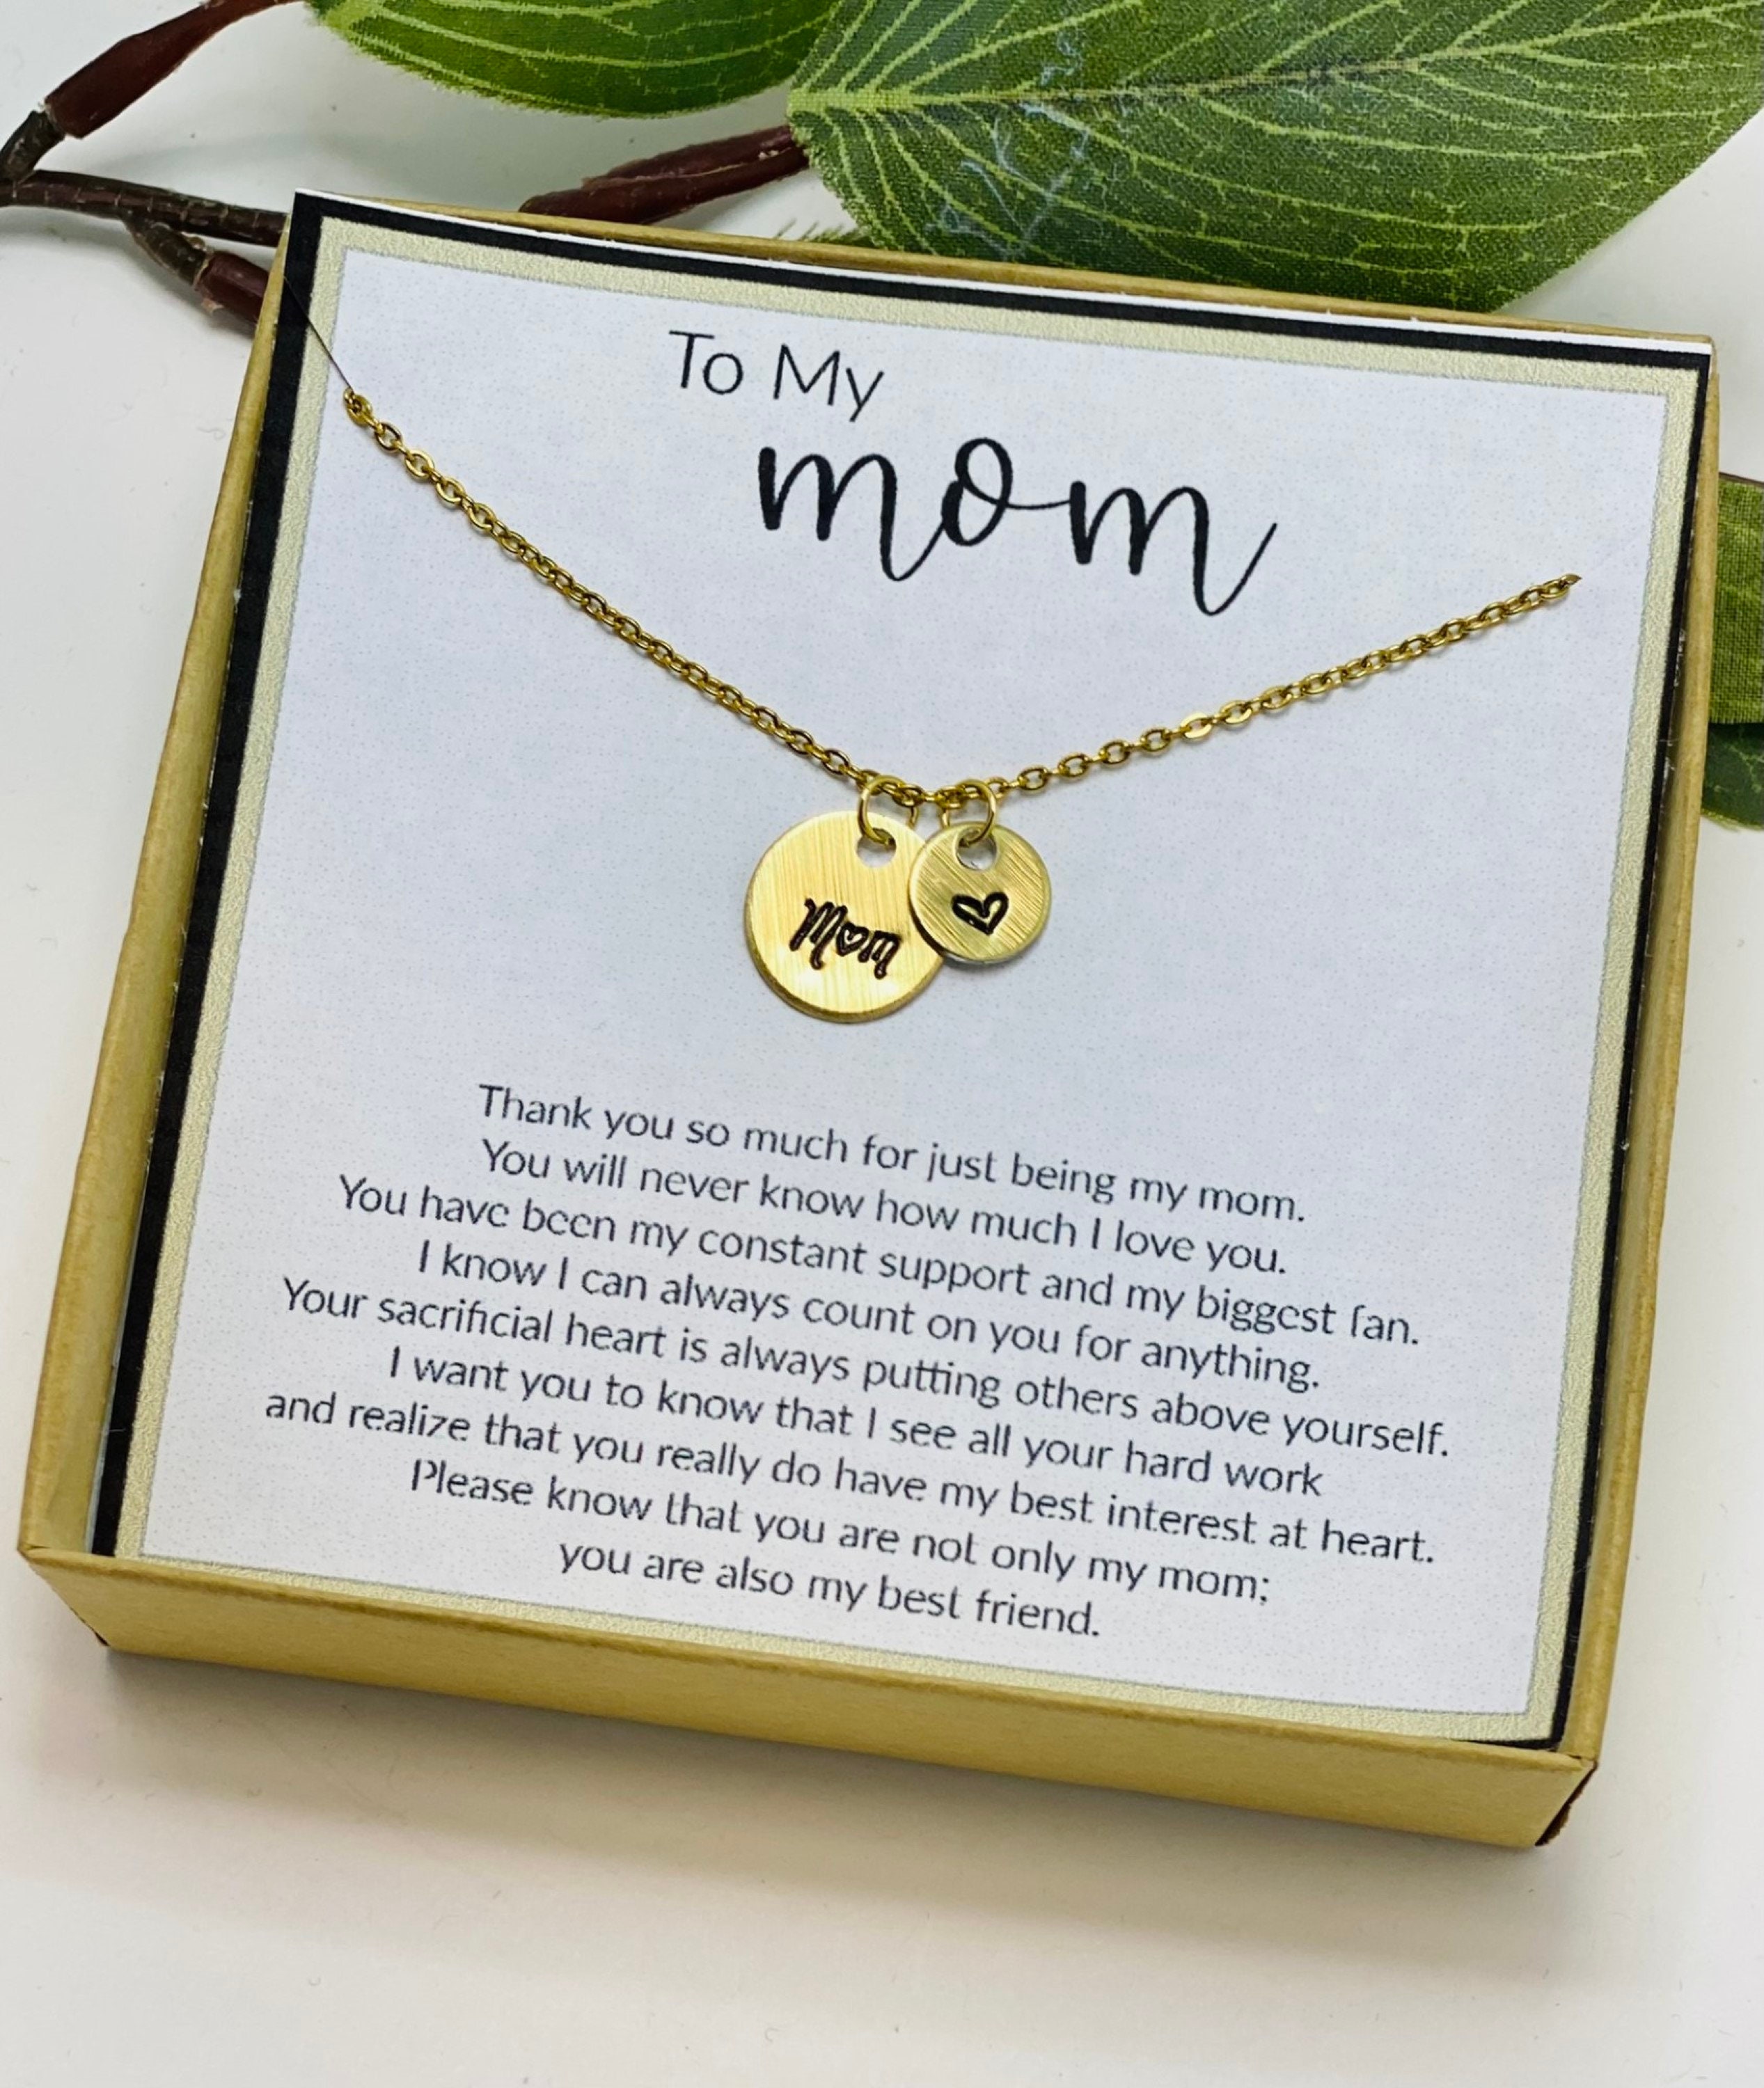 Gifts for Mom from Daughter, Son - Christmas Gifts for Mom, Mom Christmas  Gifts, Birthday Gifts for …See more Gifts for Mom from Daughter, Son 